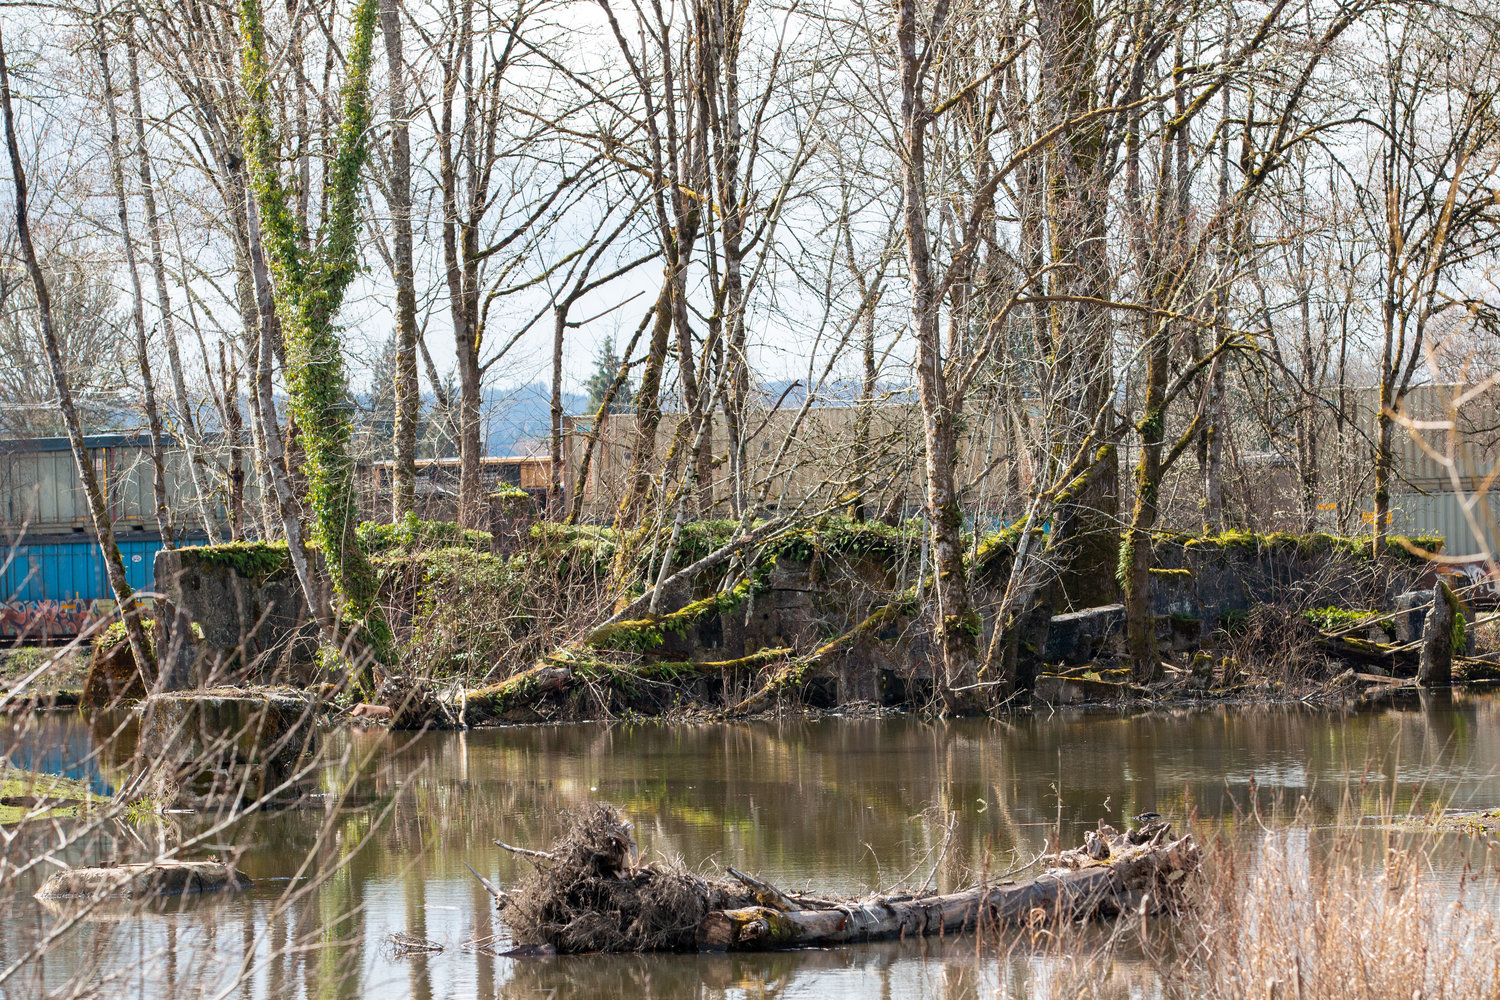 A remaining structure of the historic Agnew Lumber Mill sits on a small island in the China Creek floodwater and habitat project.